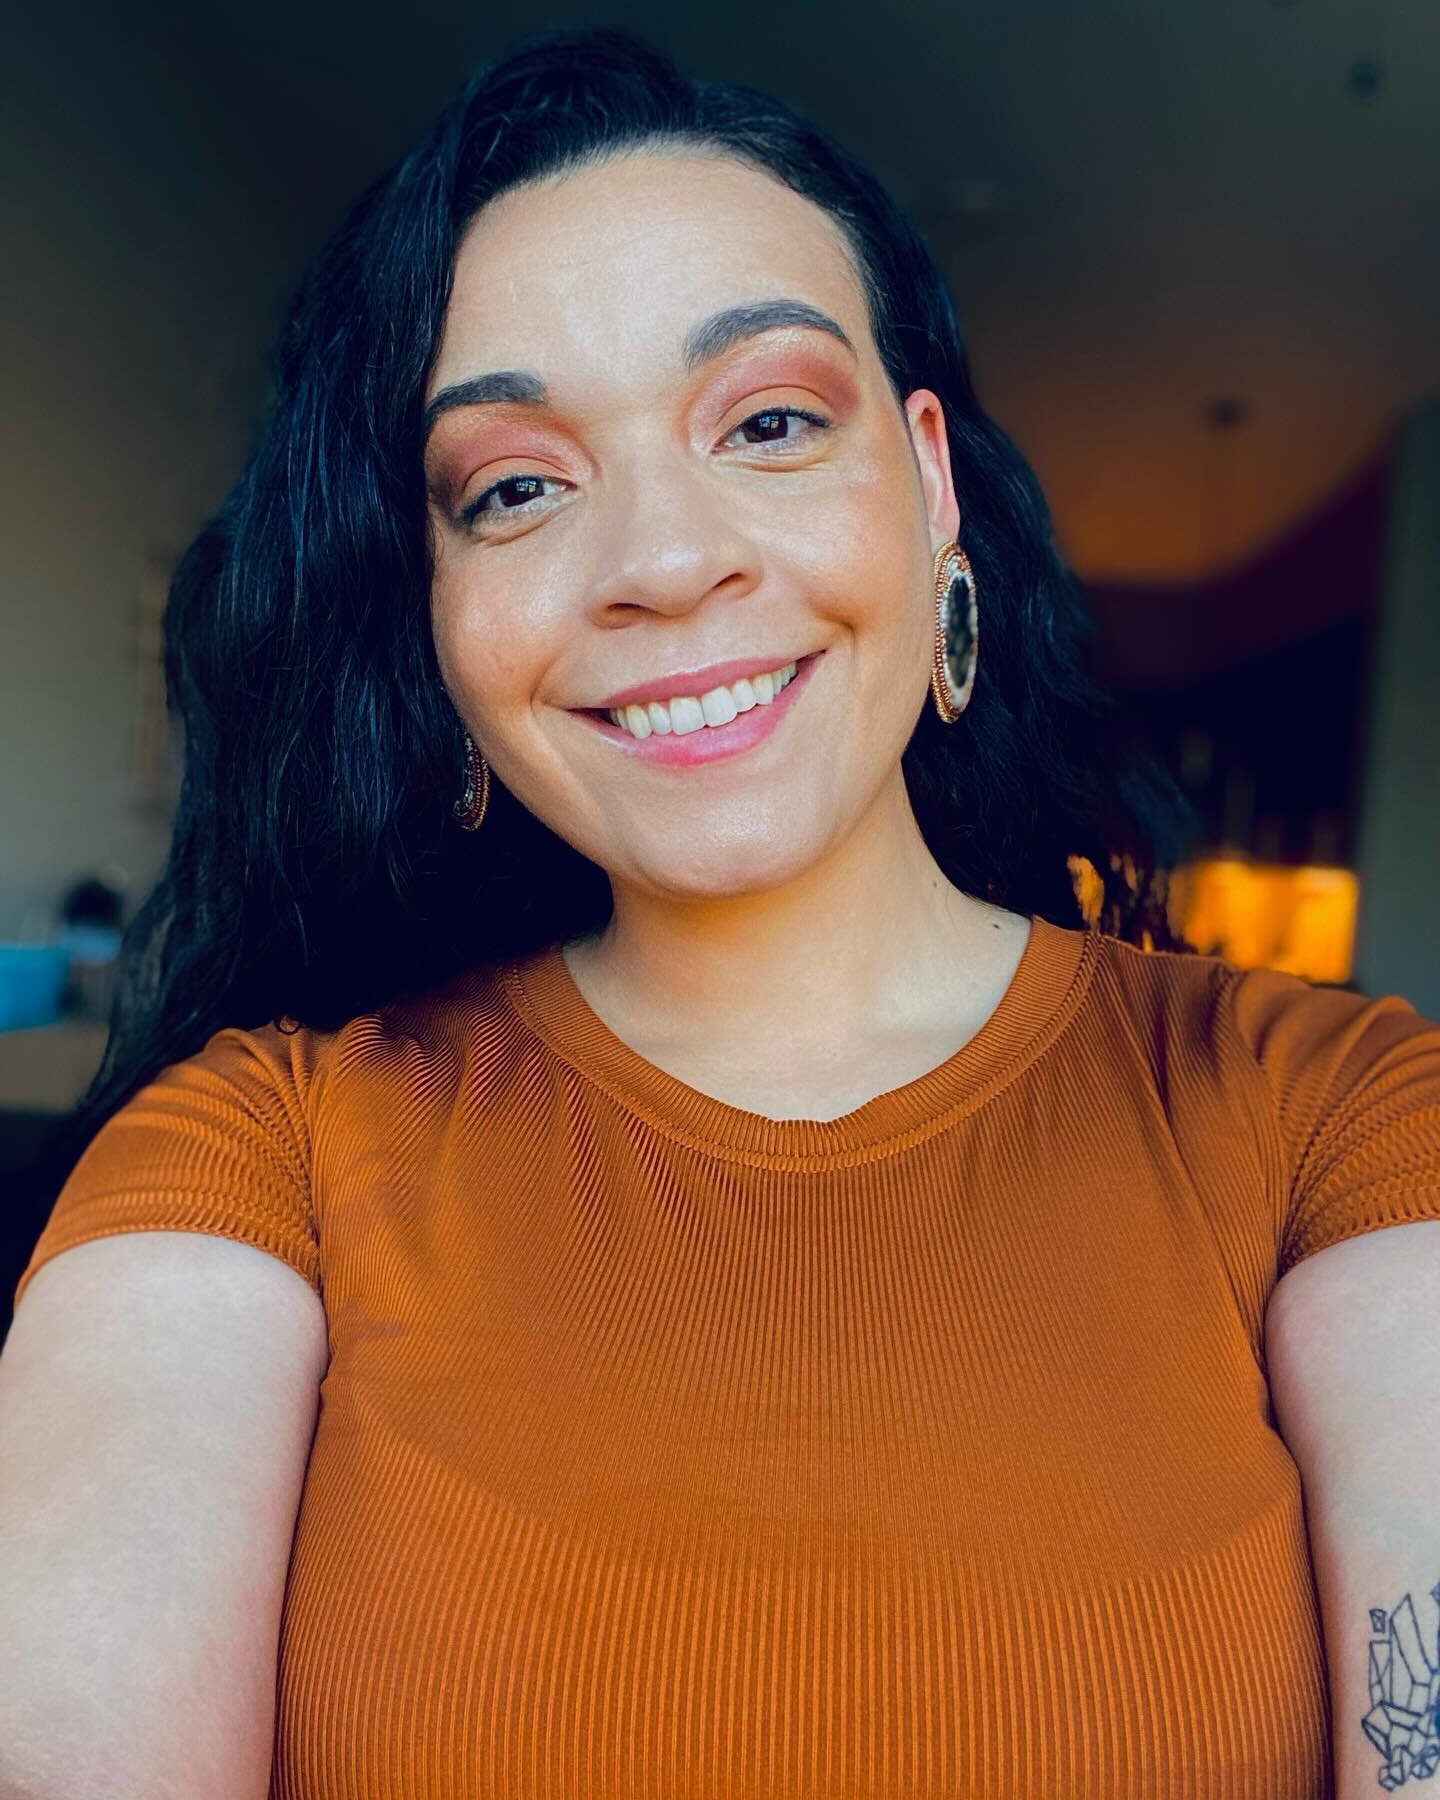 Learning to love and accept myself as I am. Who&rsquo;s with me? 🌻🧡

earrings: @creations.by.saltyyy ✨

#selfiegram #selflovejourney #acceptyourself